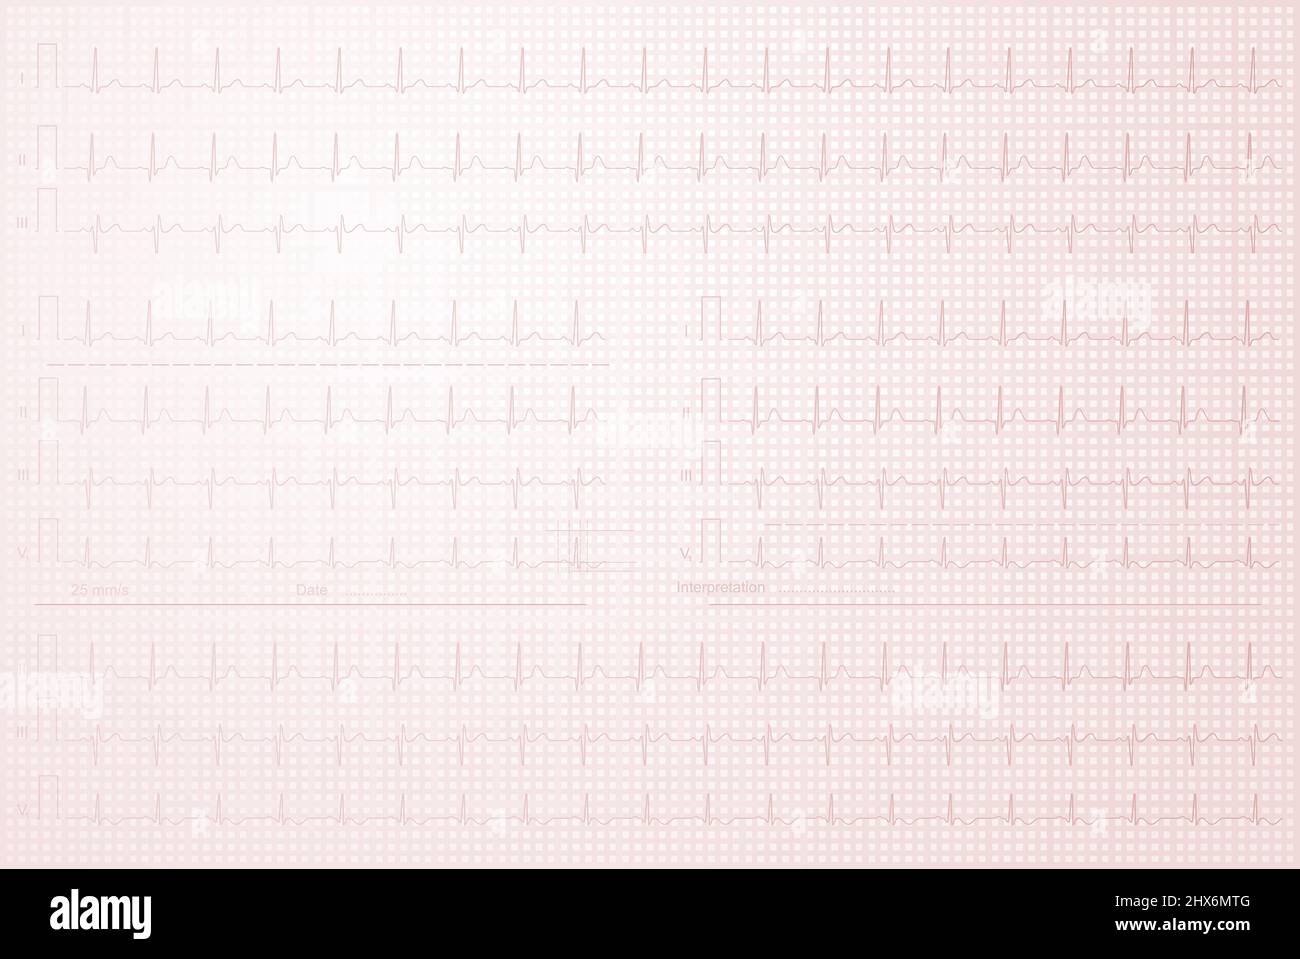 Cardiogram with lined paper as background Stock Photo